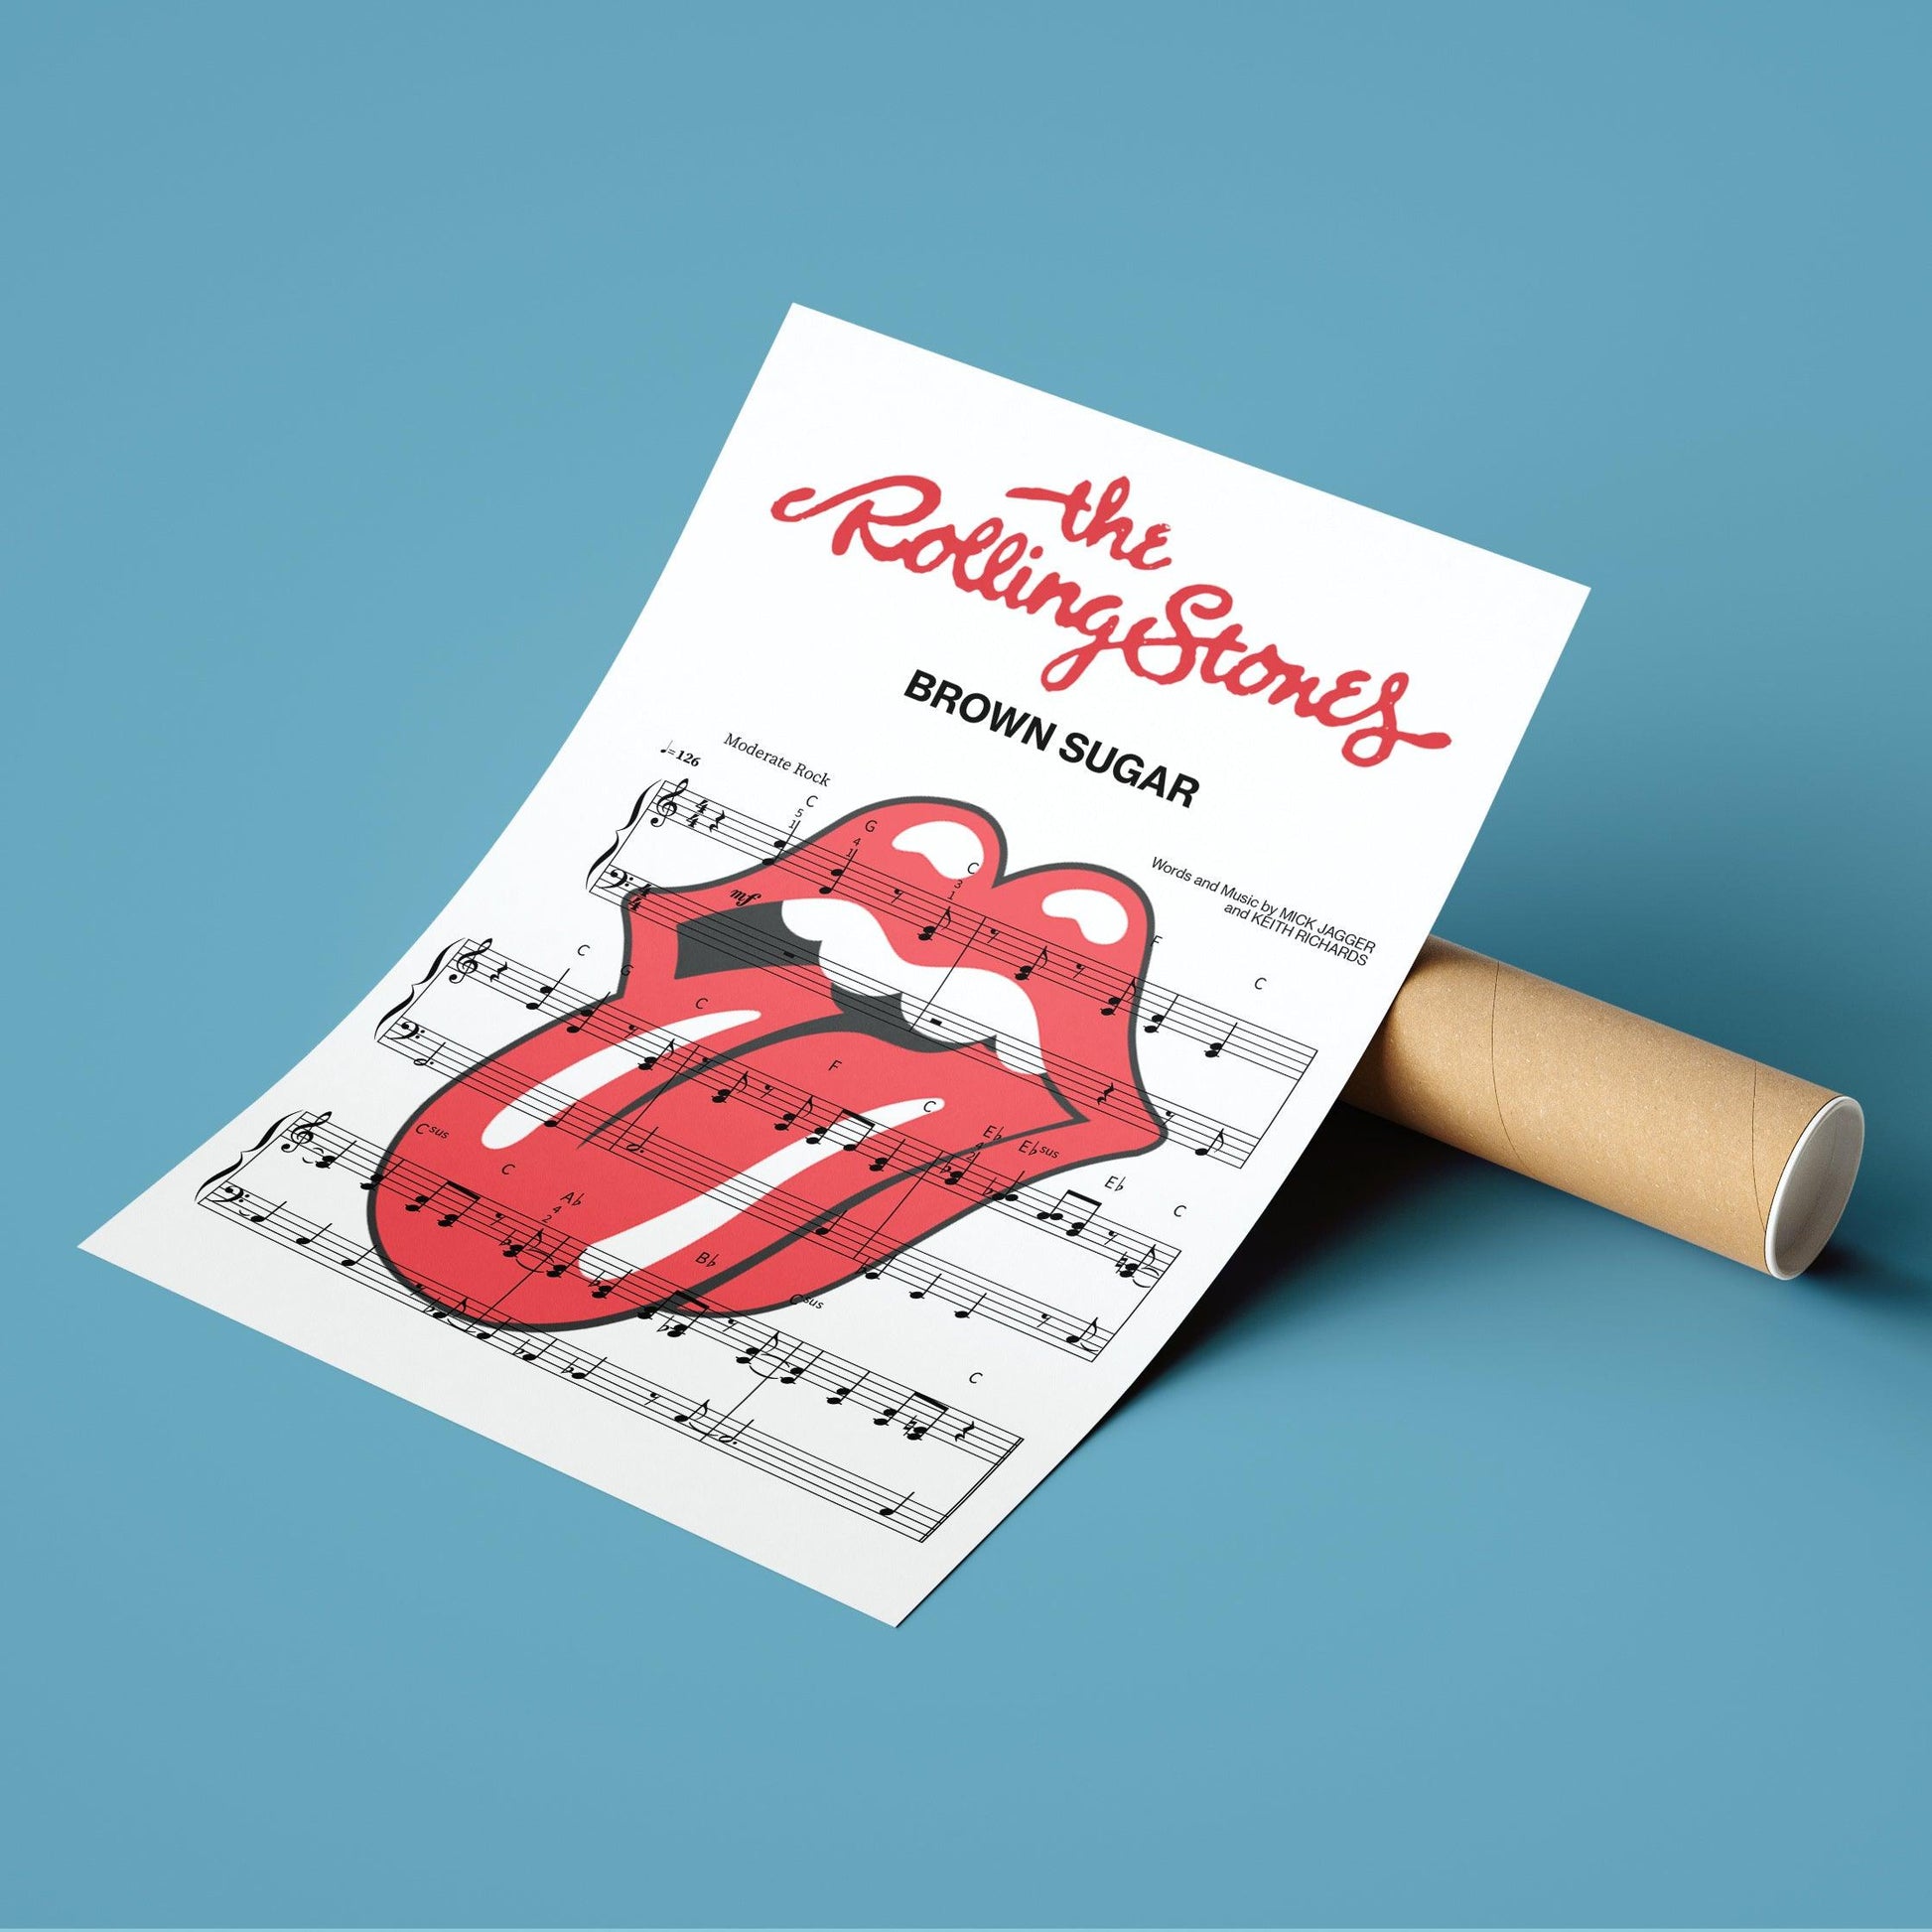 Browse & Discover Thousands of products. Read Customer Reviews and Find Best Sellers. Get deals on The Rolling Stones Poster at 98types.com